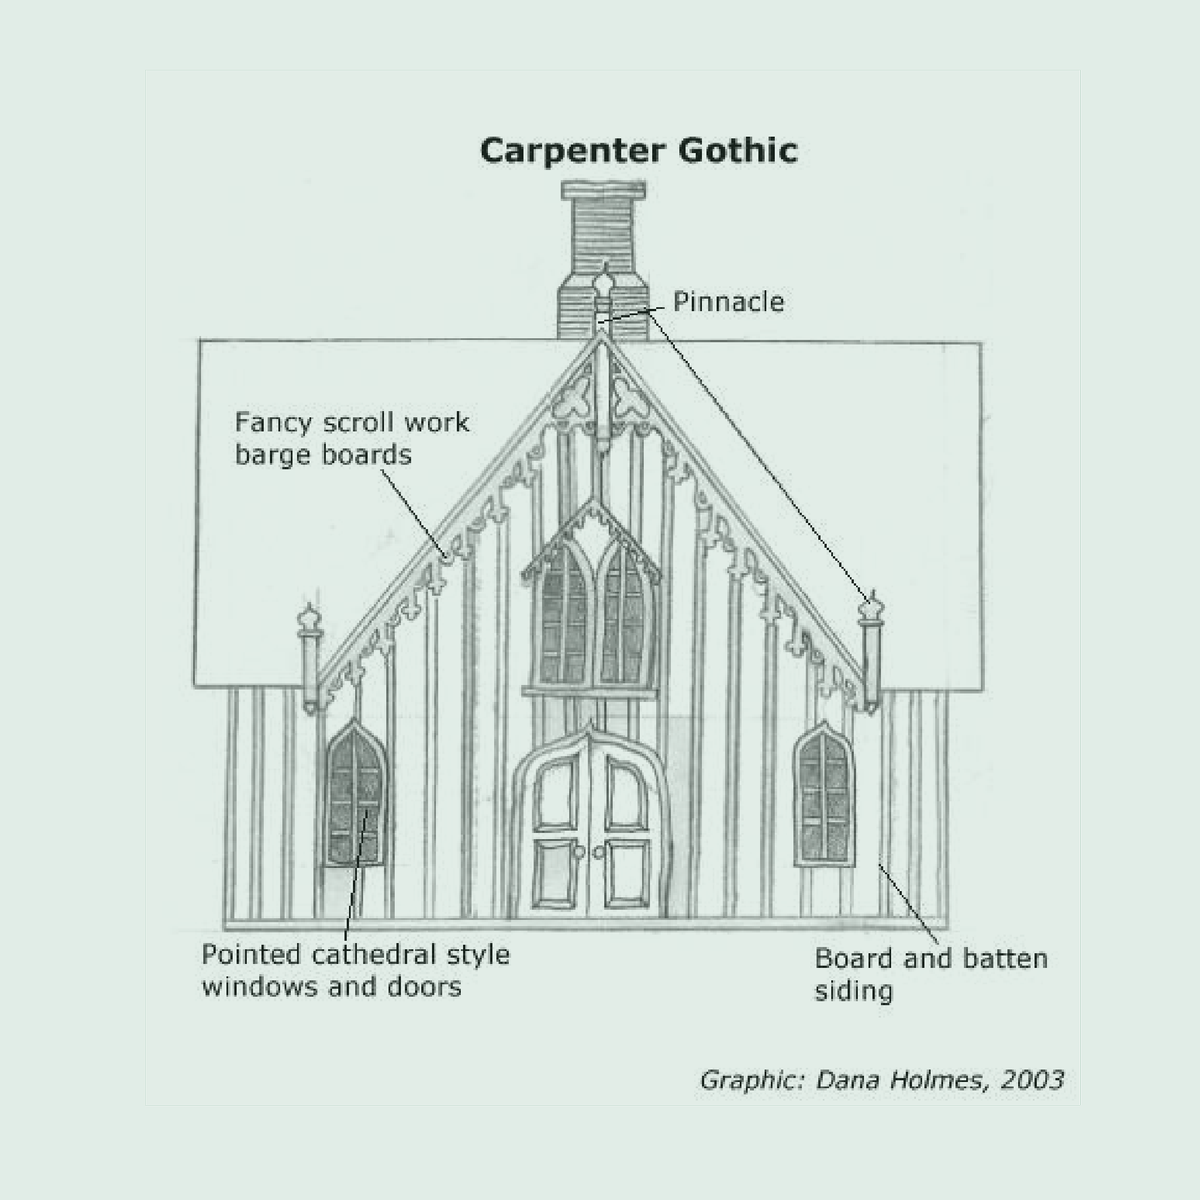 0 Replies 0 Retweets 1 Like - Carpenter Gothic Architecture (1200x1200), Png Download